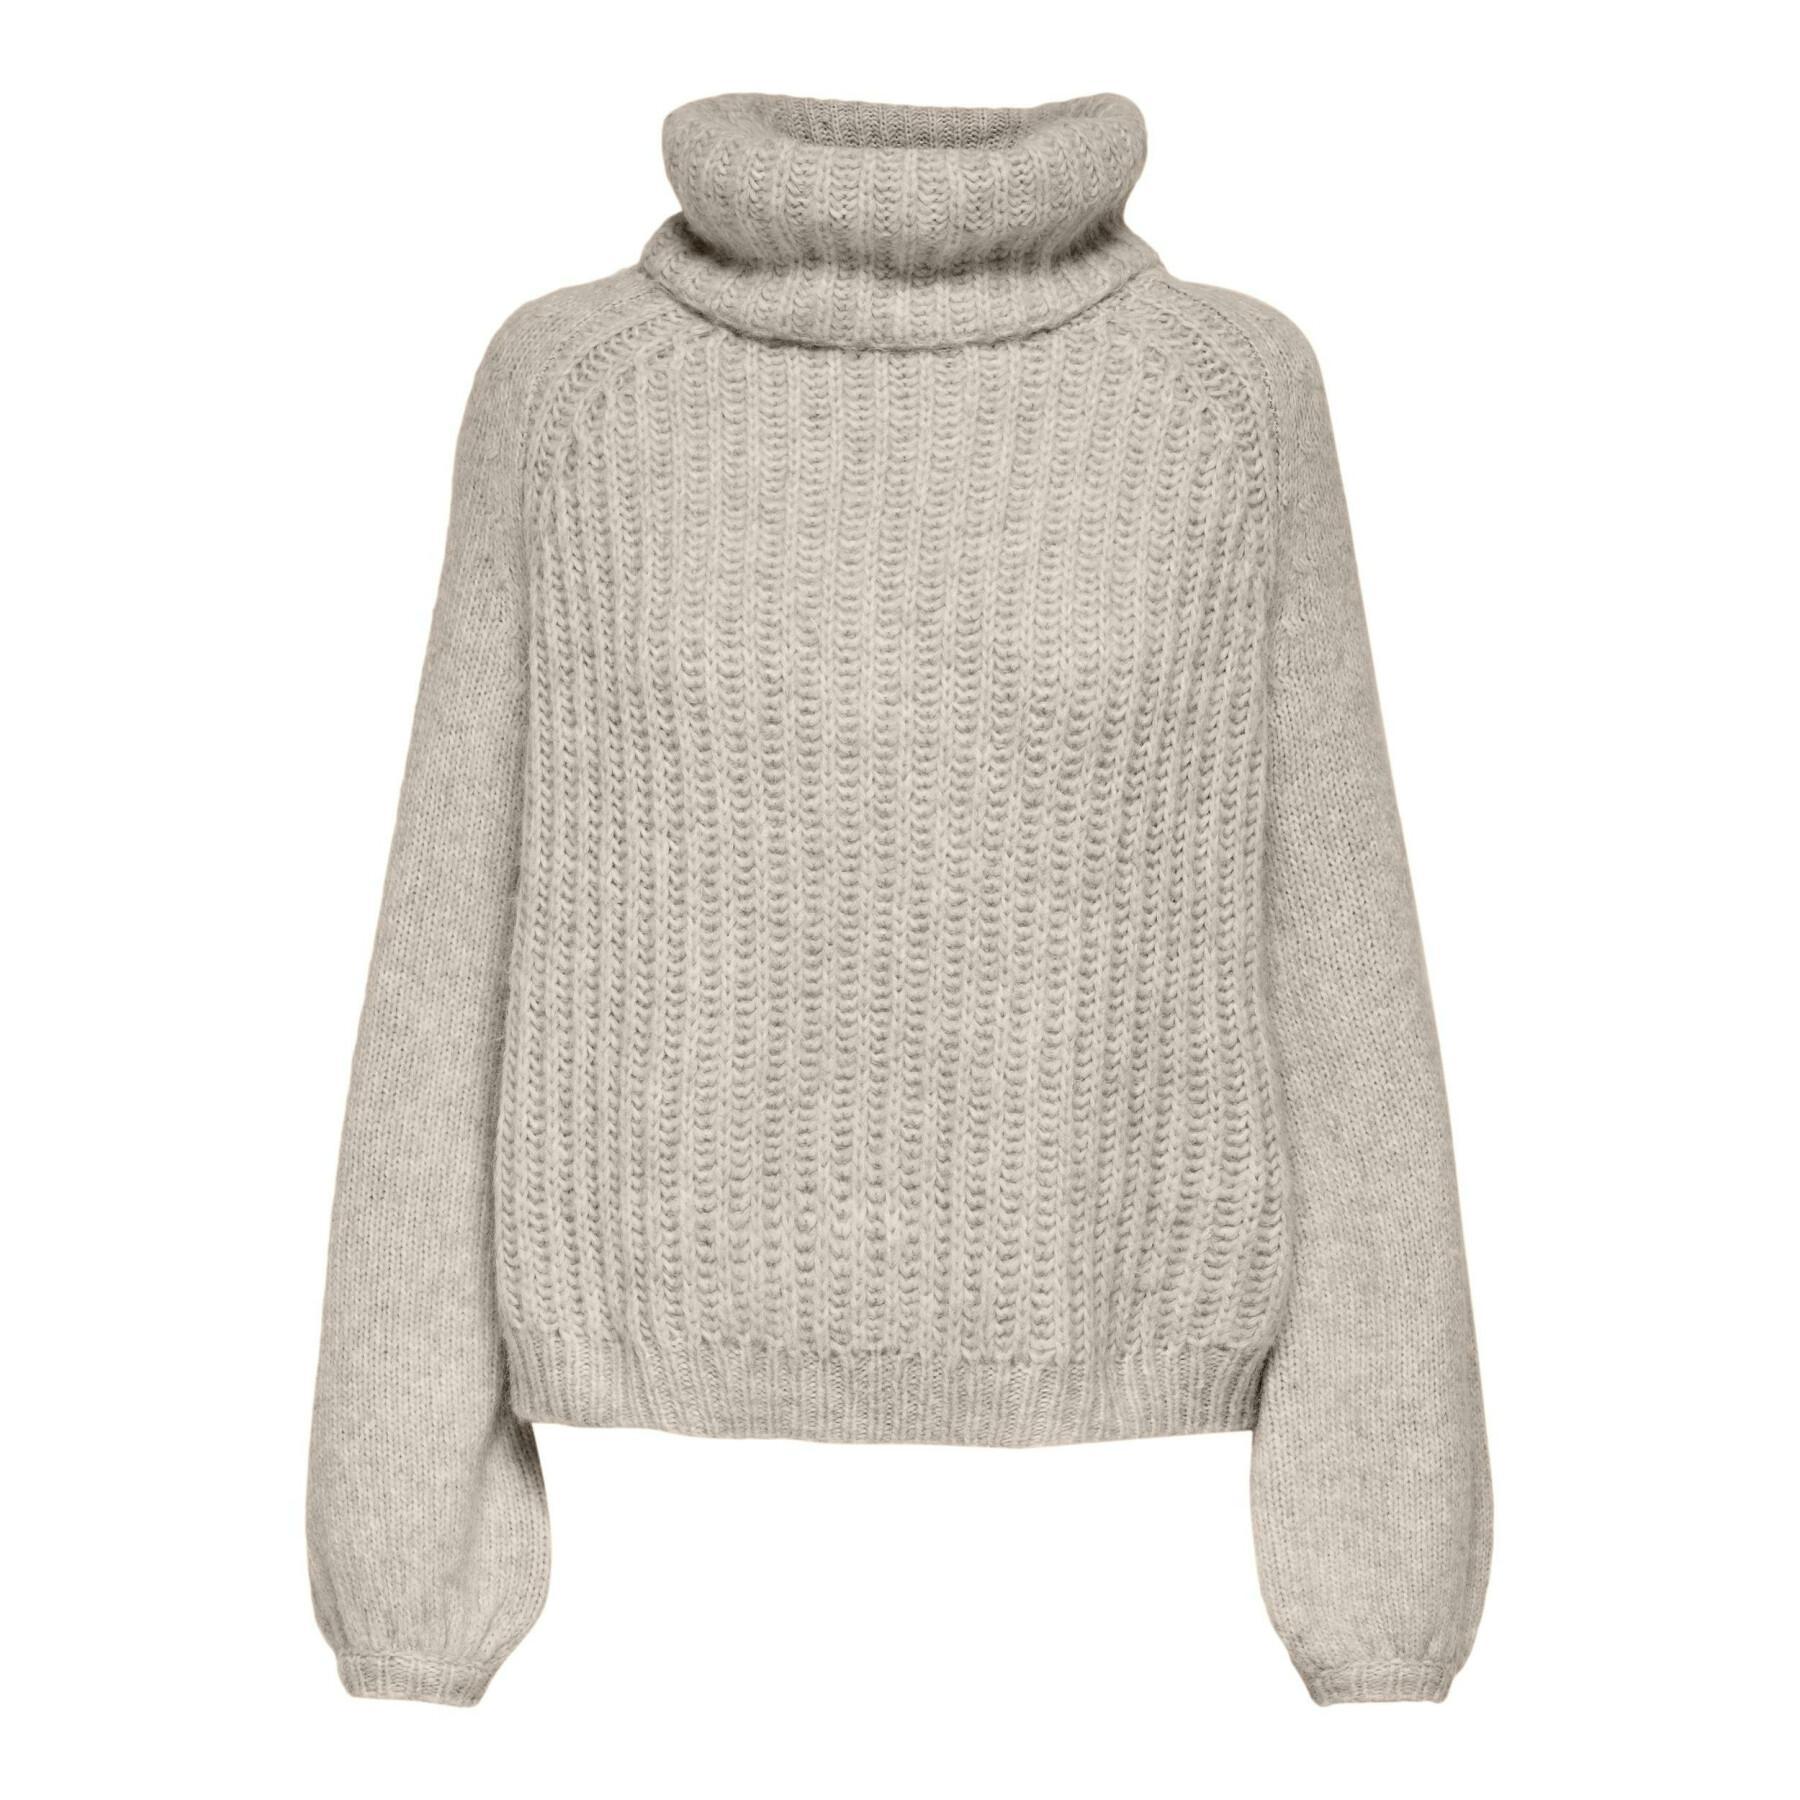 Women's sweater Only onlscala rollneck